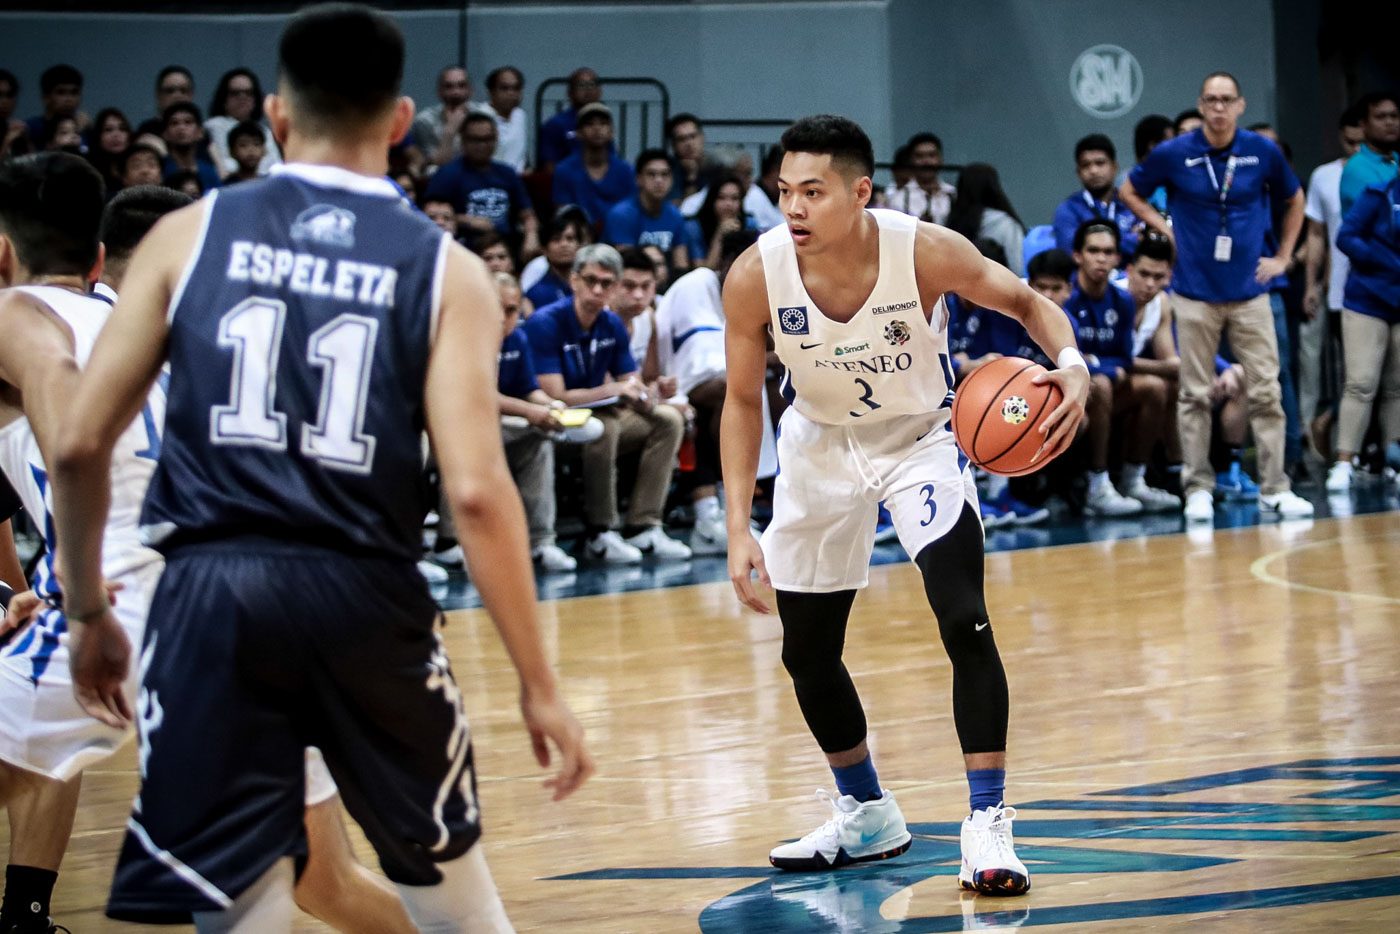 Sidelined for a year, Ateneo’s Adrian Wong eyes big comeback